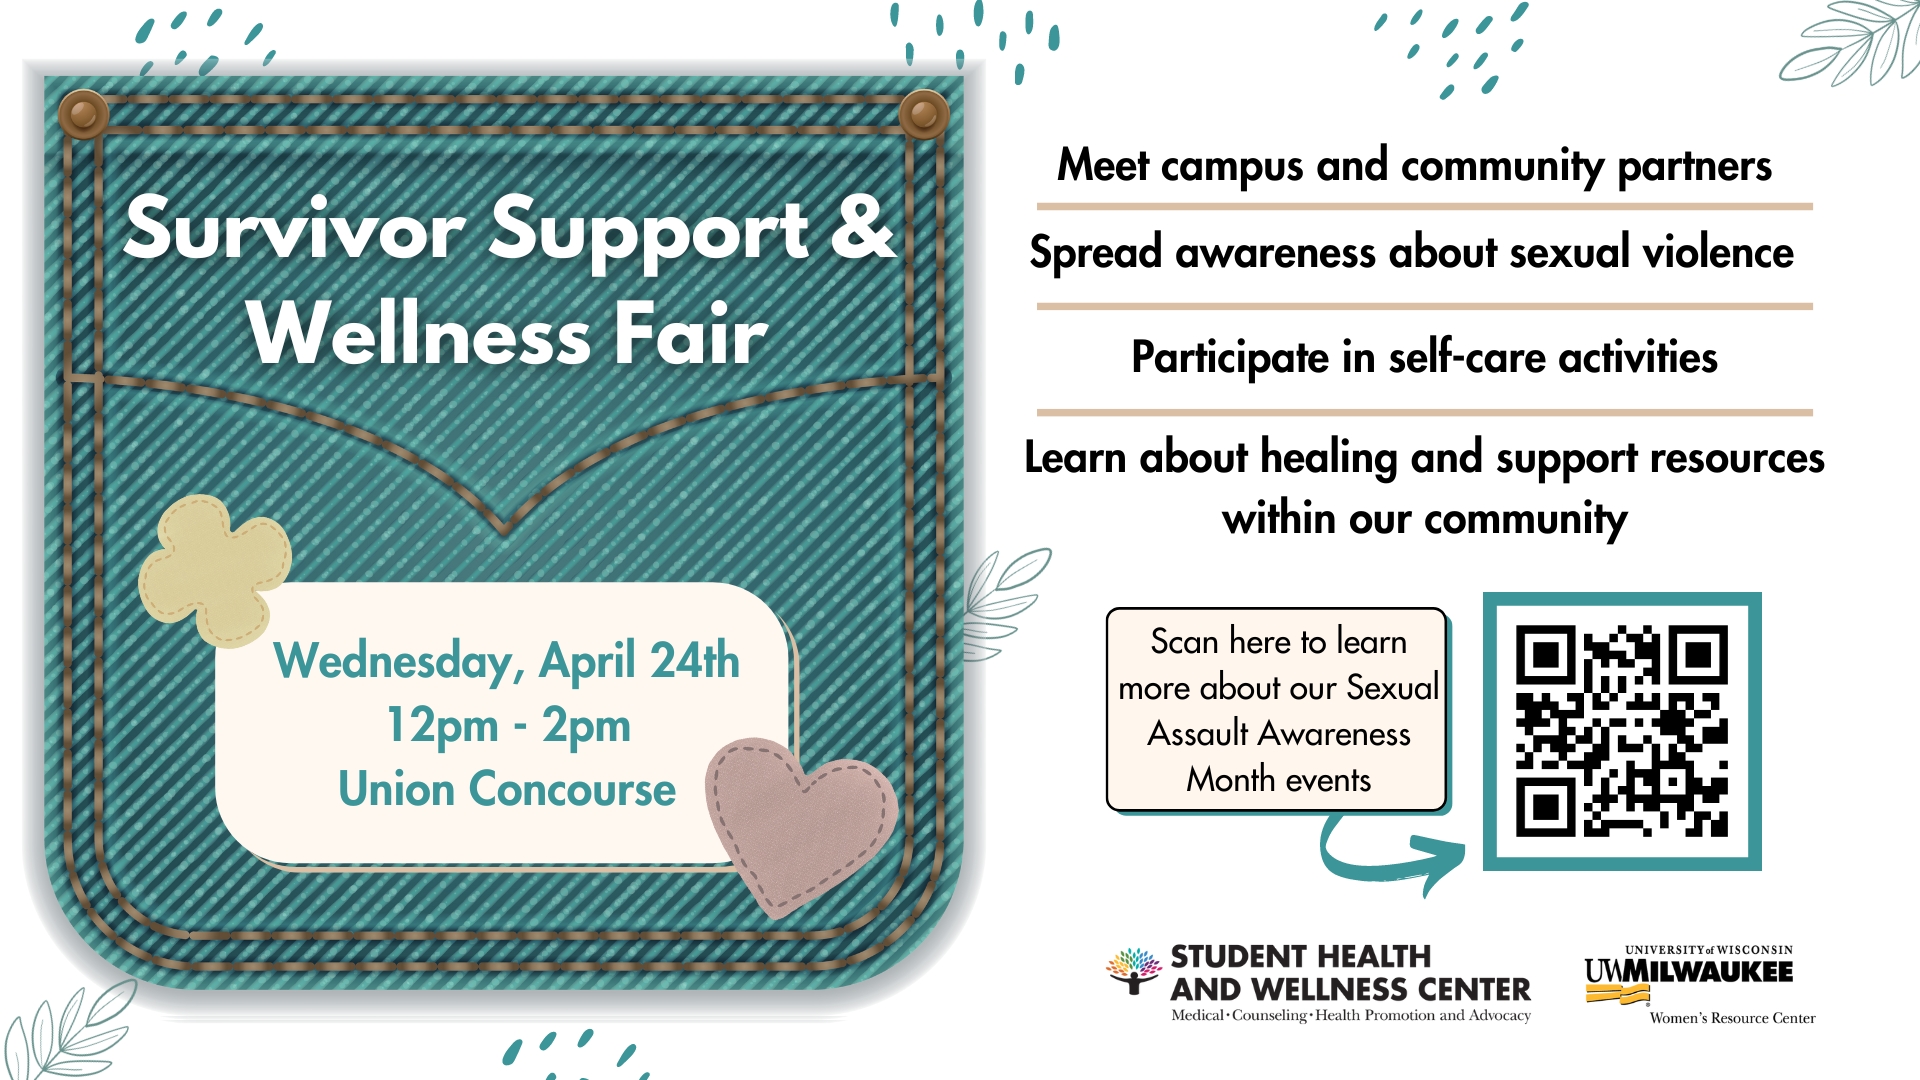 A graphic with a clip art pocket in the middle displaying information about a survivor support fair in the union